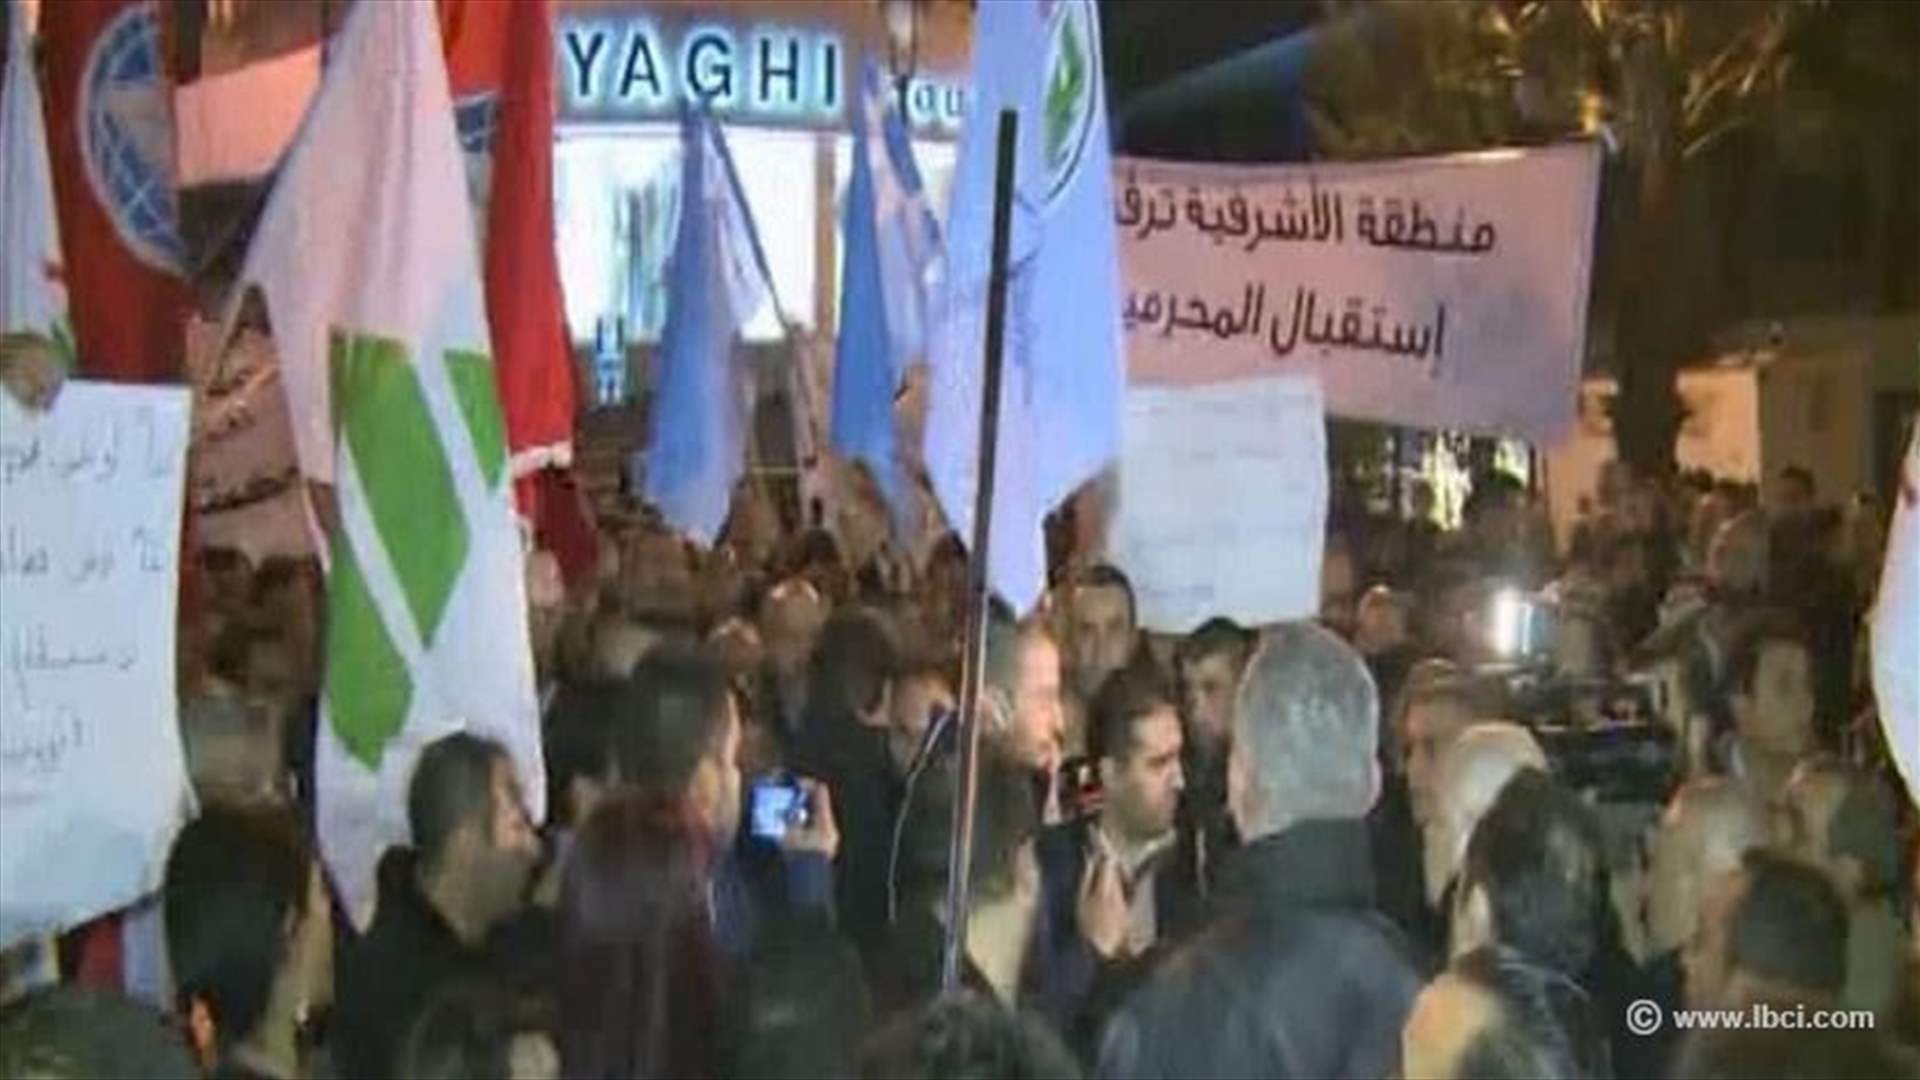 Supporters of March 14 parties protest outside Samaha’s house 